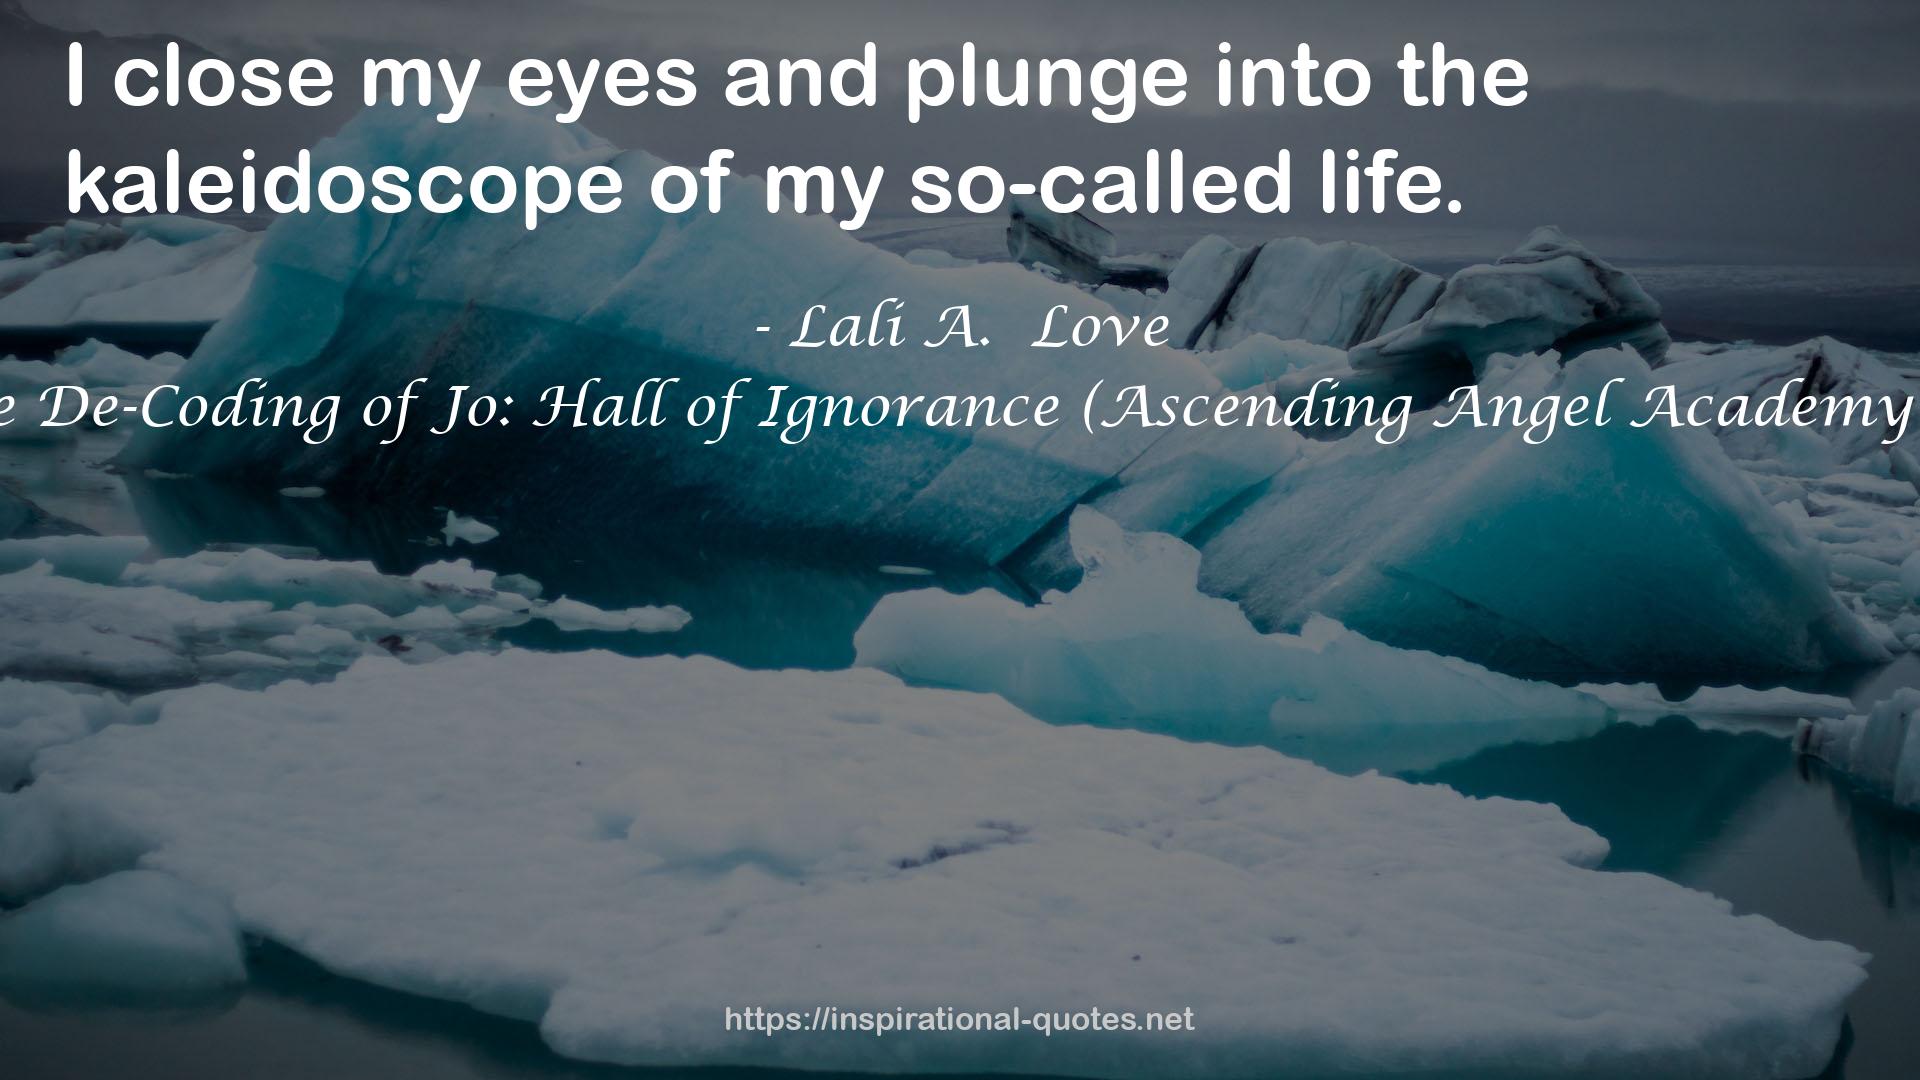 The De-Coding of Jo: Hall of Ignorance (Ascending Angel Academy #1) QUOTES